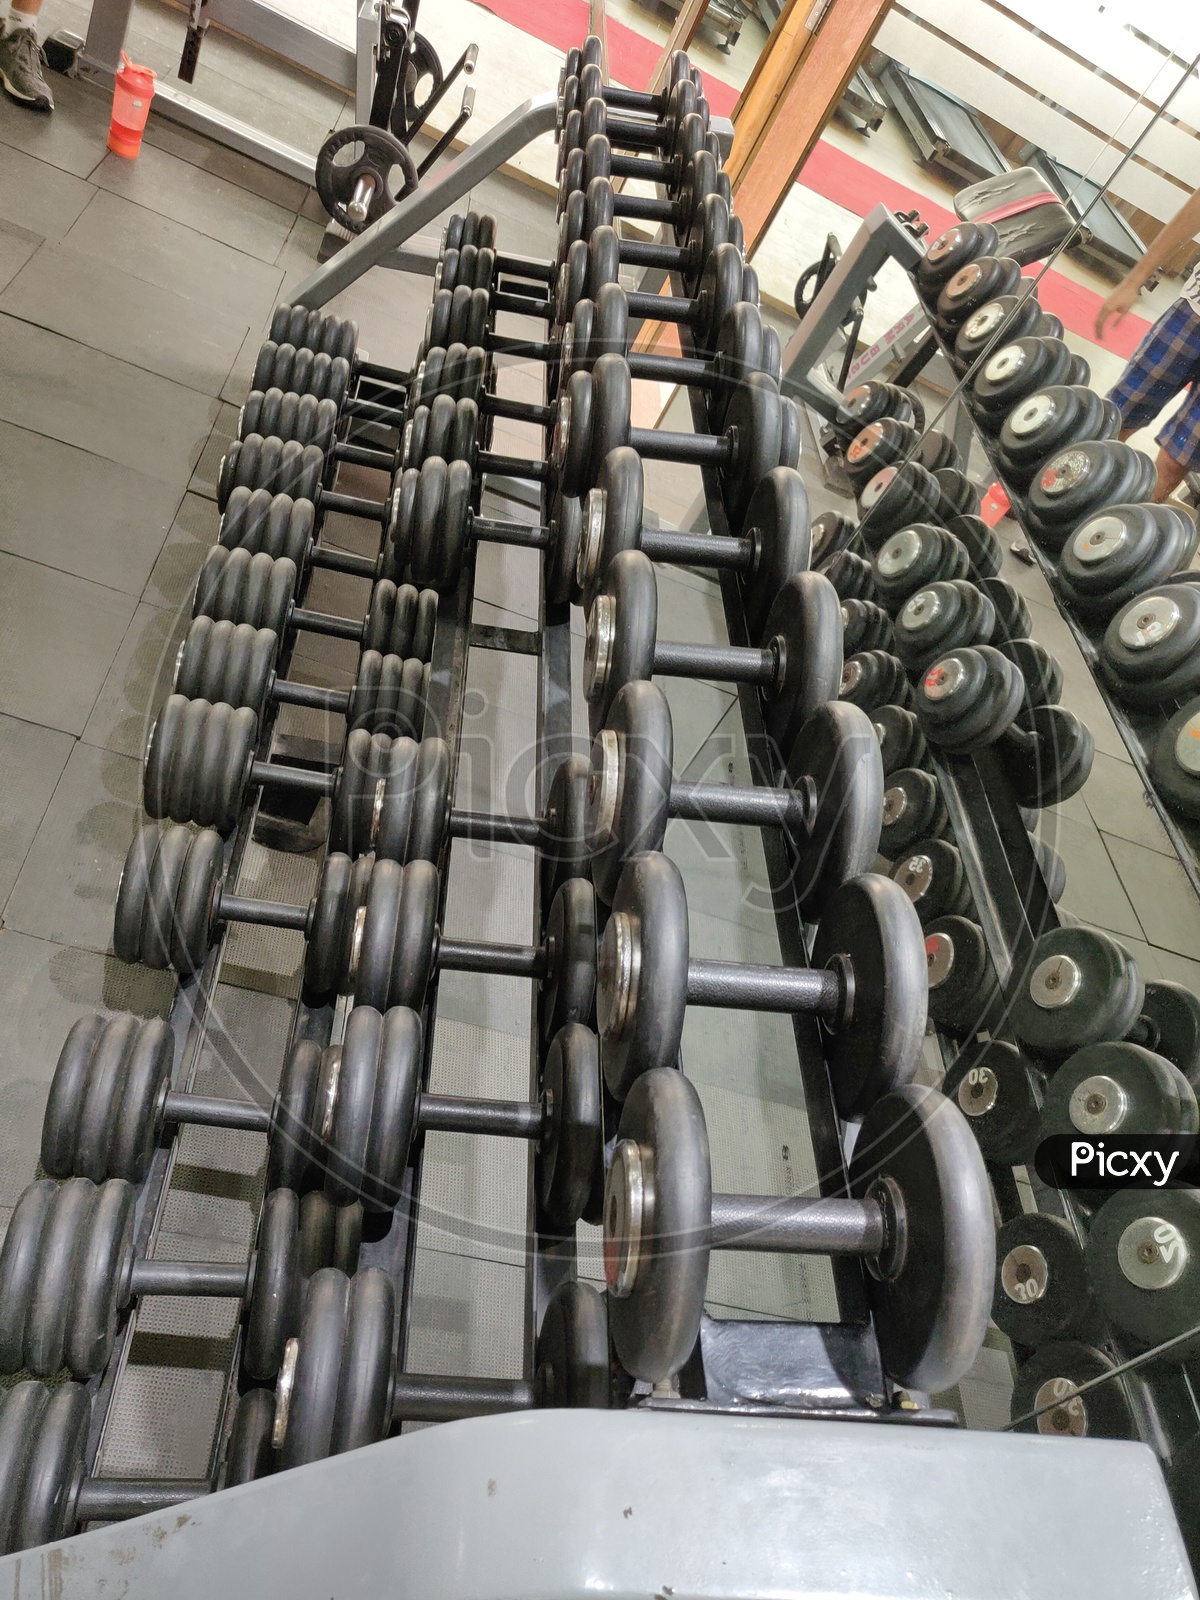 Dumbbells used in gym.